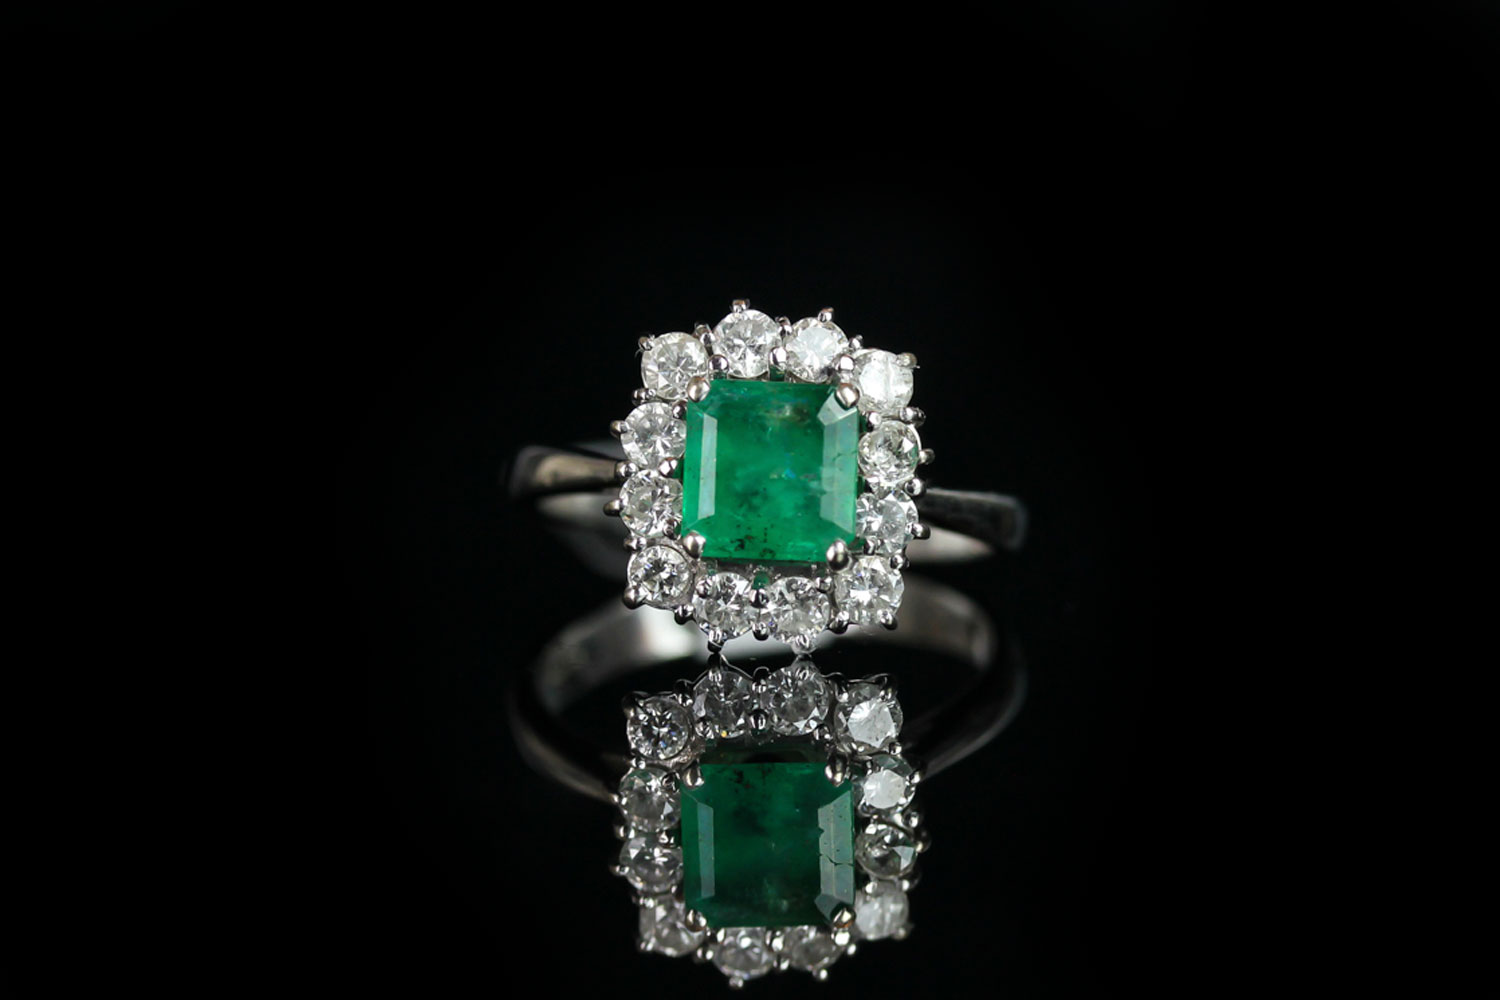 18CT WHITE GOLD EMERALD AND DIAMOND CLUSTER RING, emerald estimated 6.3x 6.4mm, hallmarked , ring